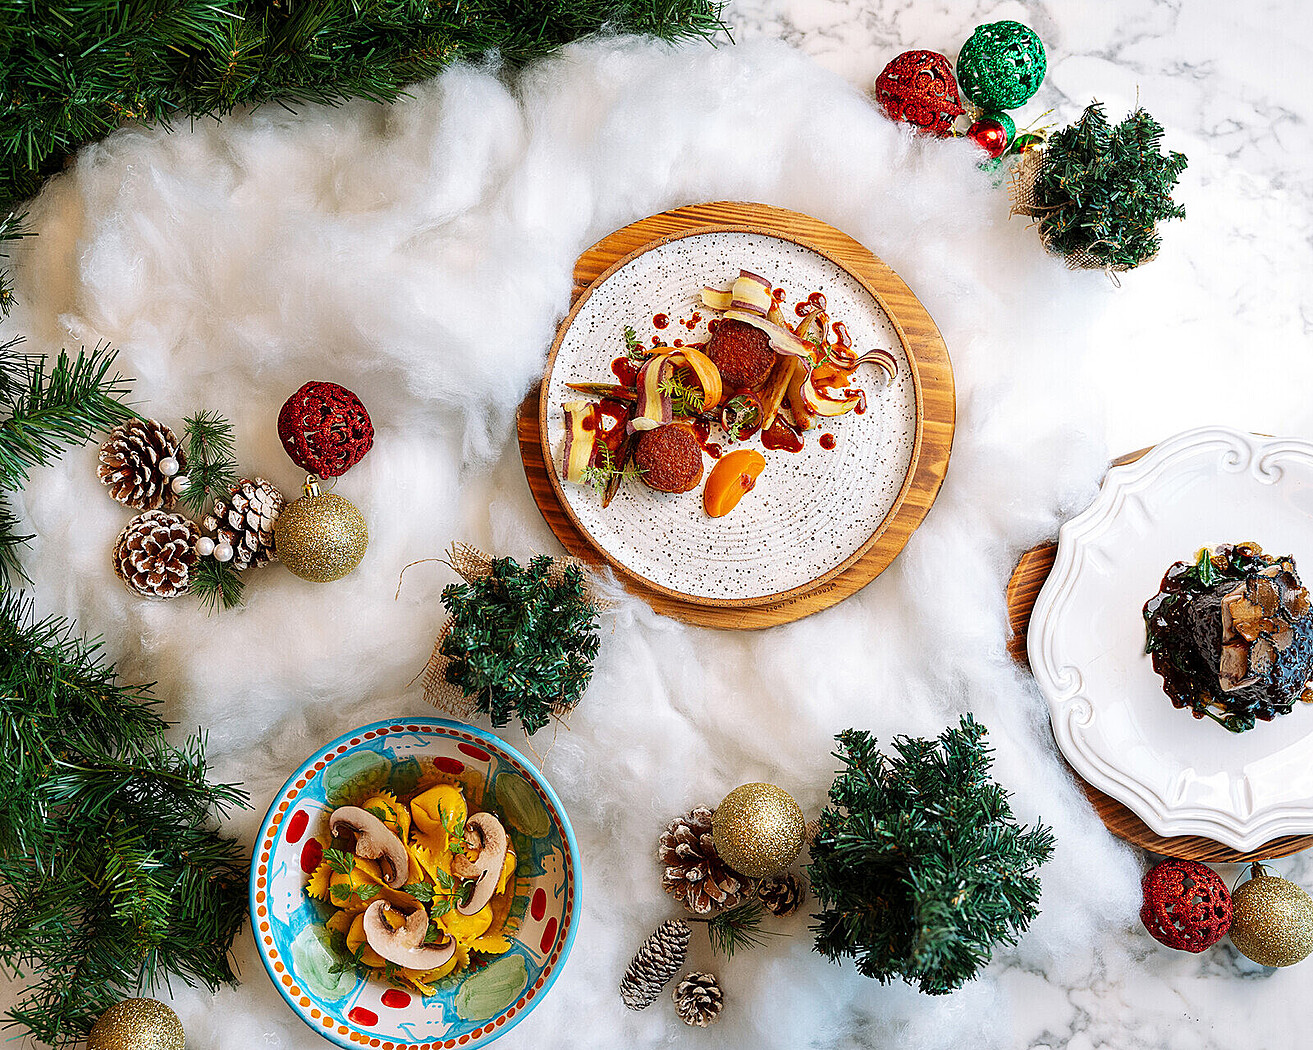 Several dishes sitting a tufted cloud of cotton meant to look like snow surrounded by pine cones, christmas ornament balls, mistletoe, and fir branches